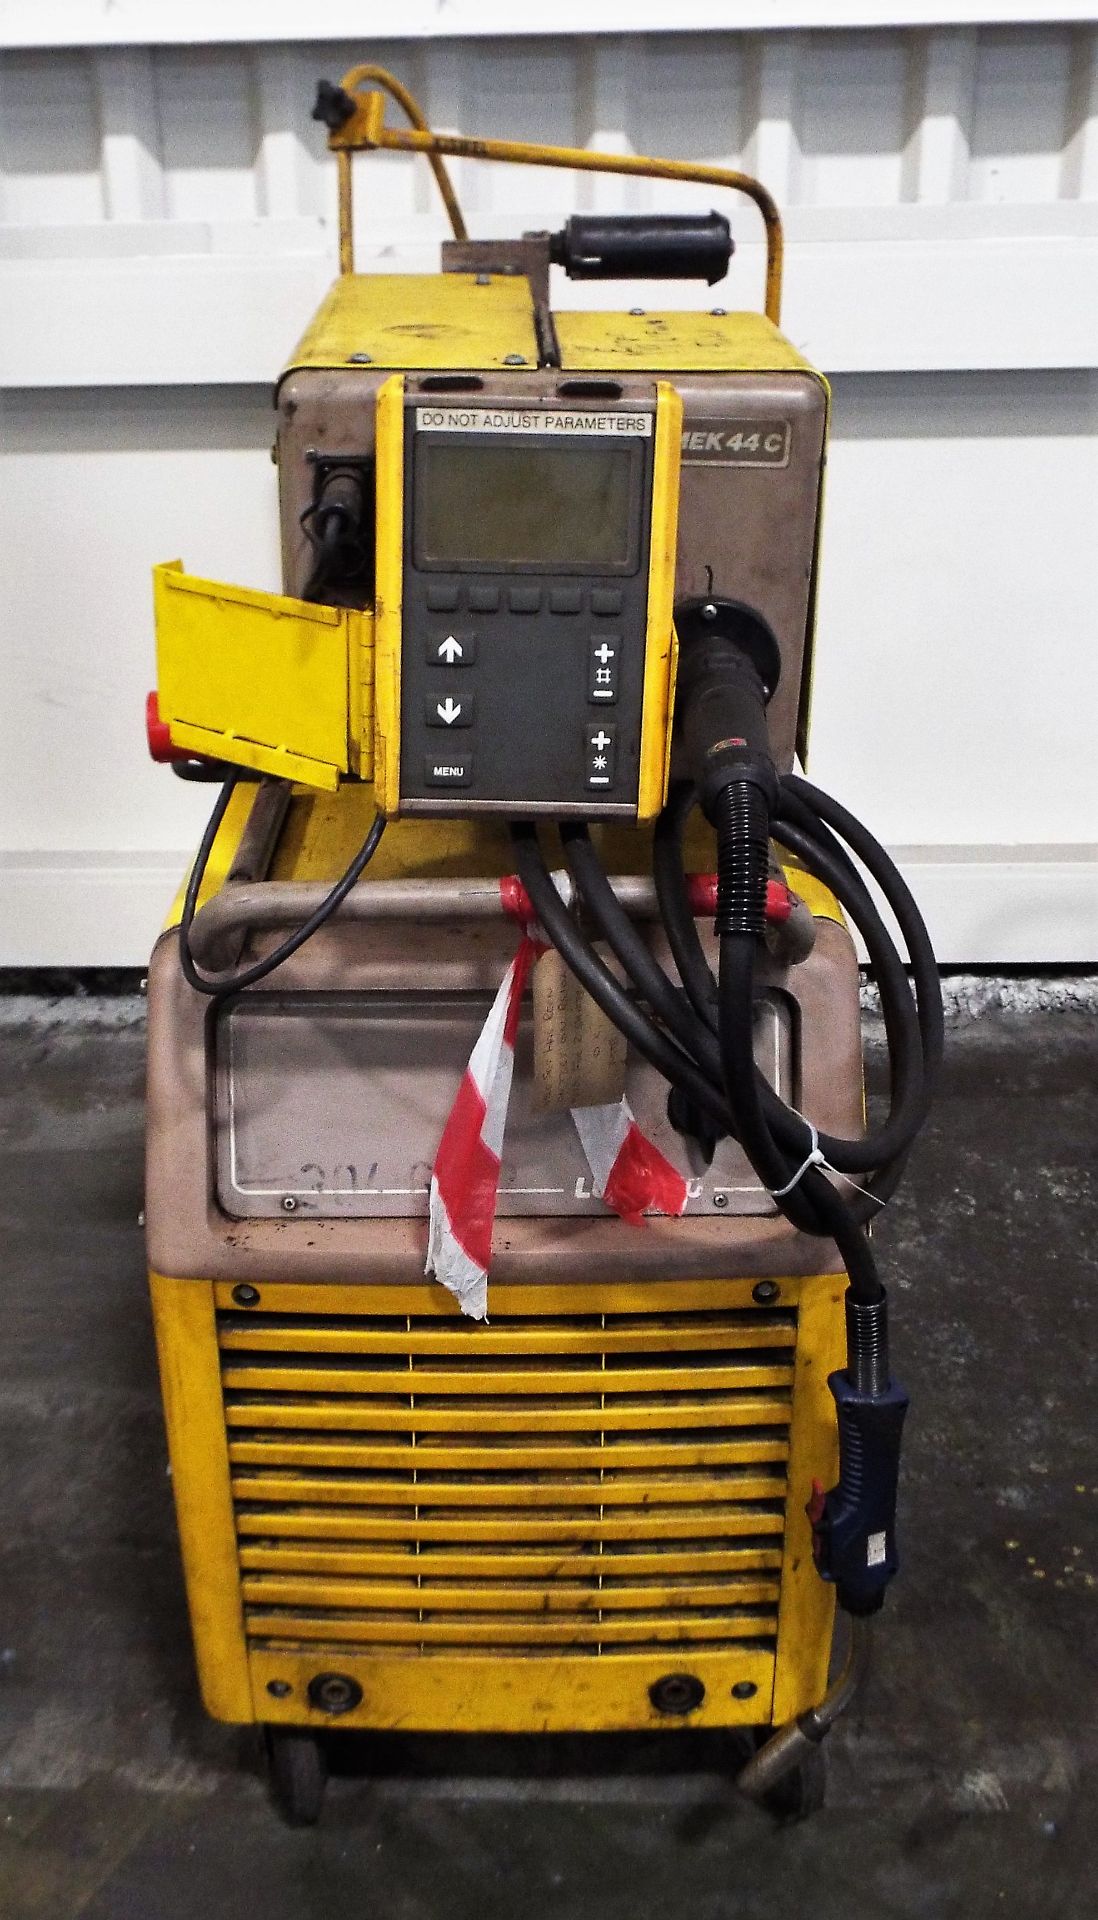 Esab Aristo Portable Welding Set complete with MEK 44C Wire Feed & PUA-1 Pendant. - Image 2 of 7